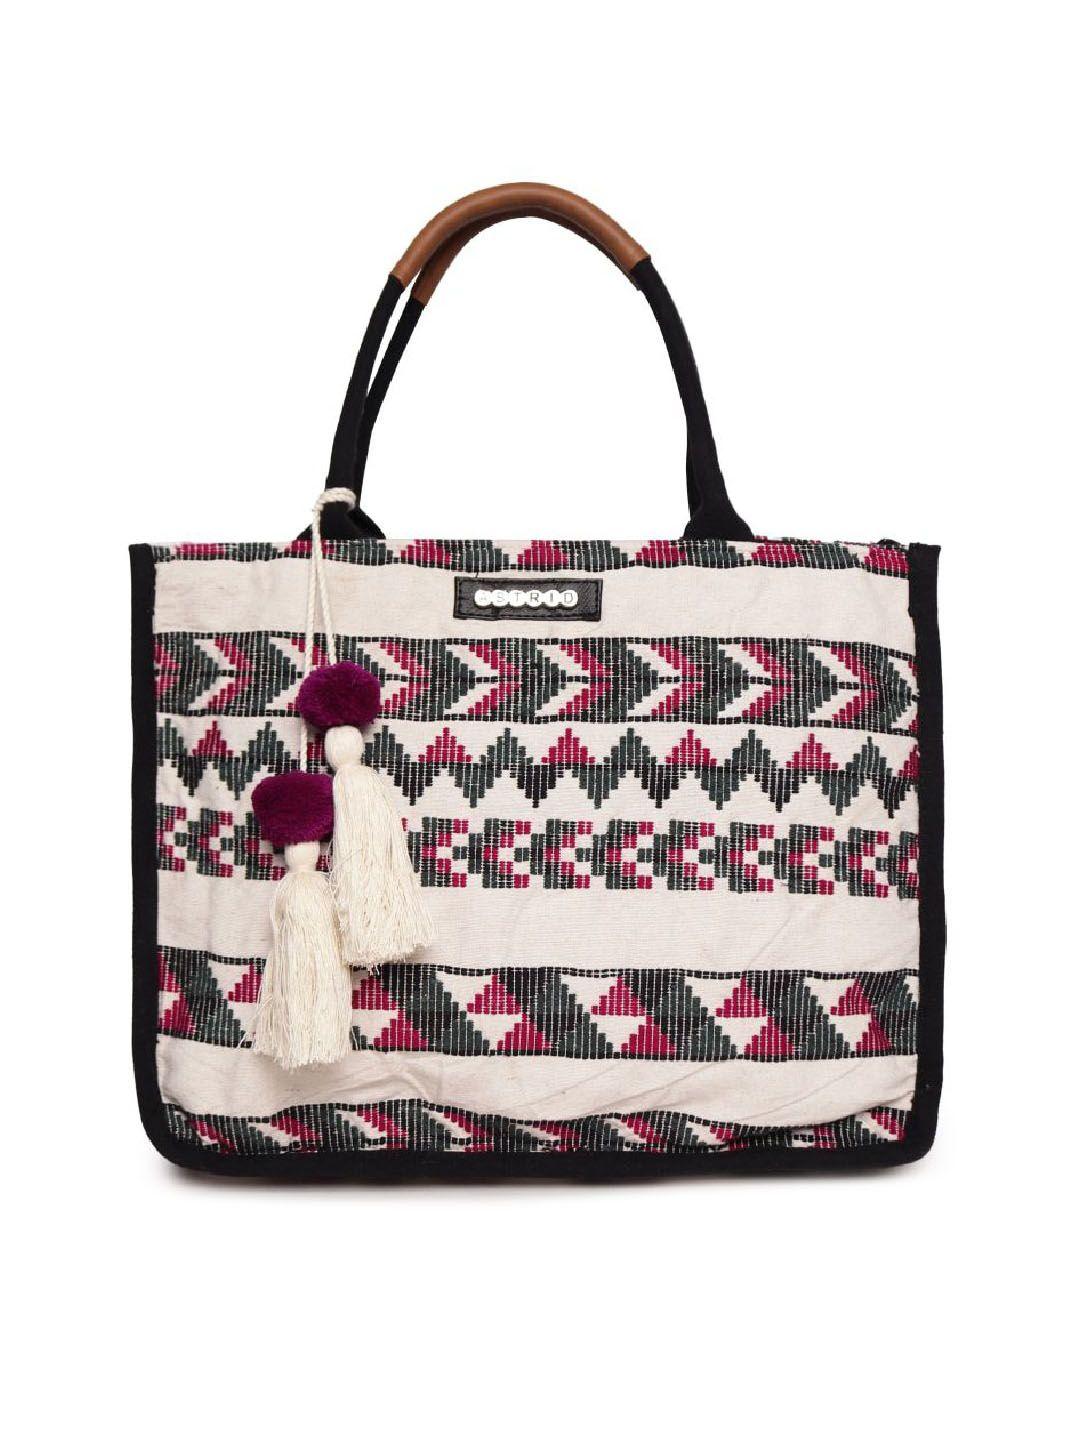 astrid geometric printed structured tote bag with tasselled